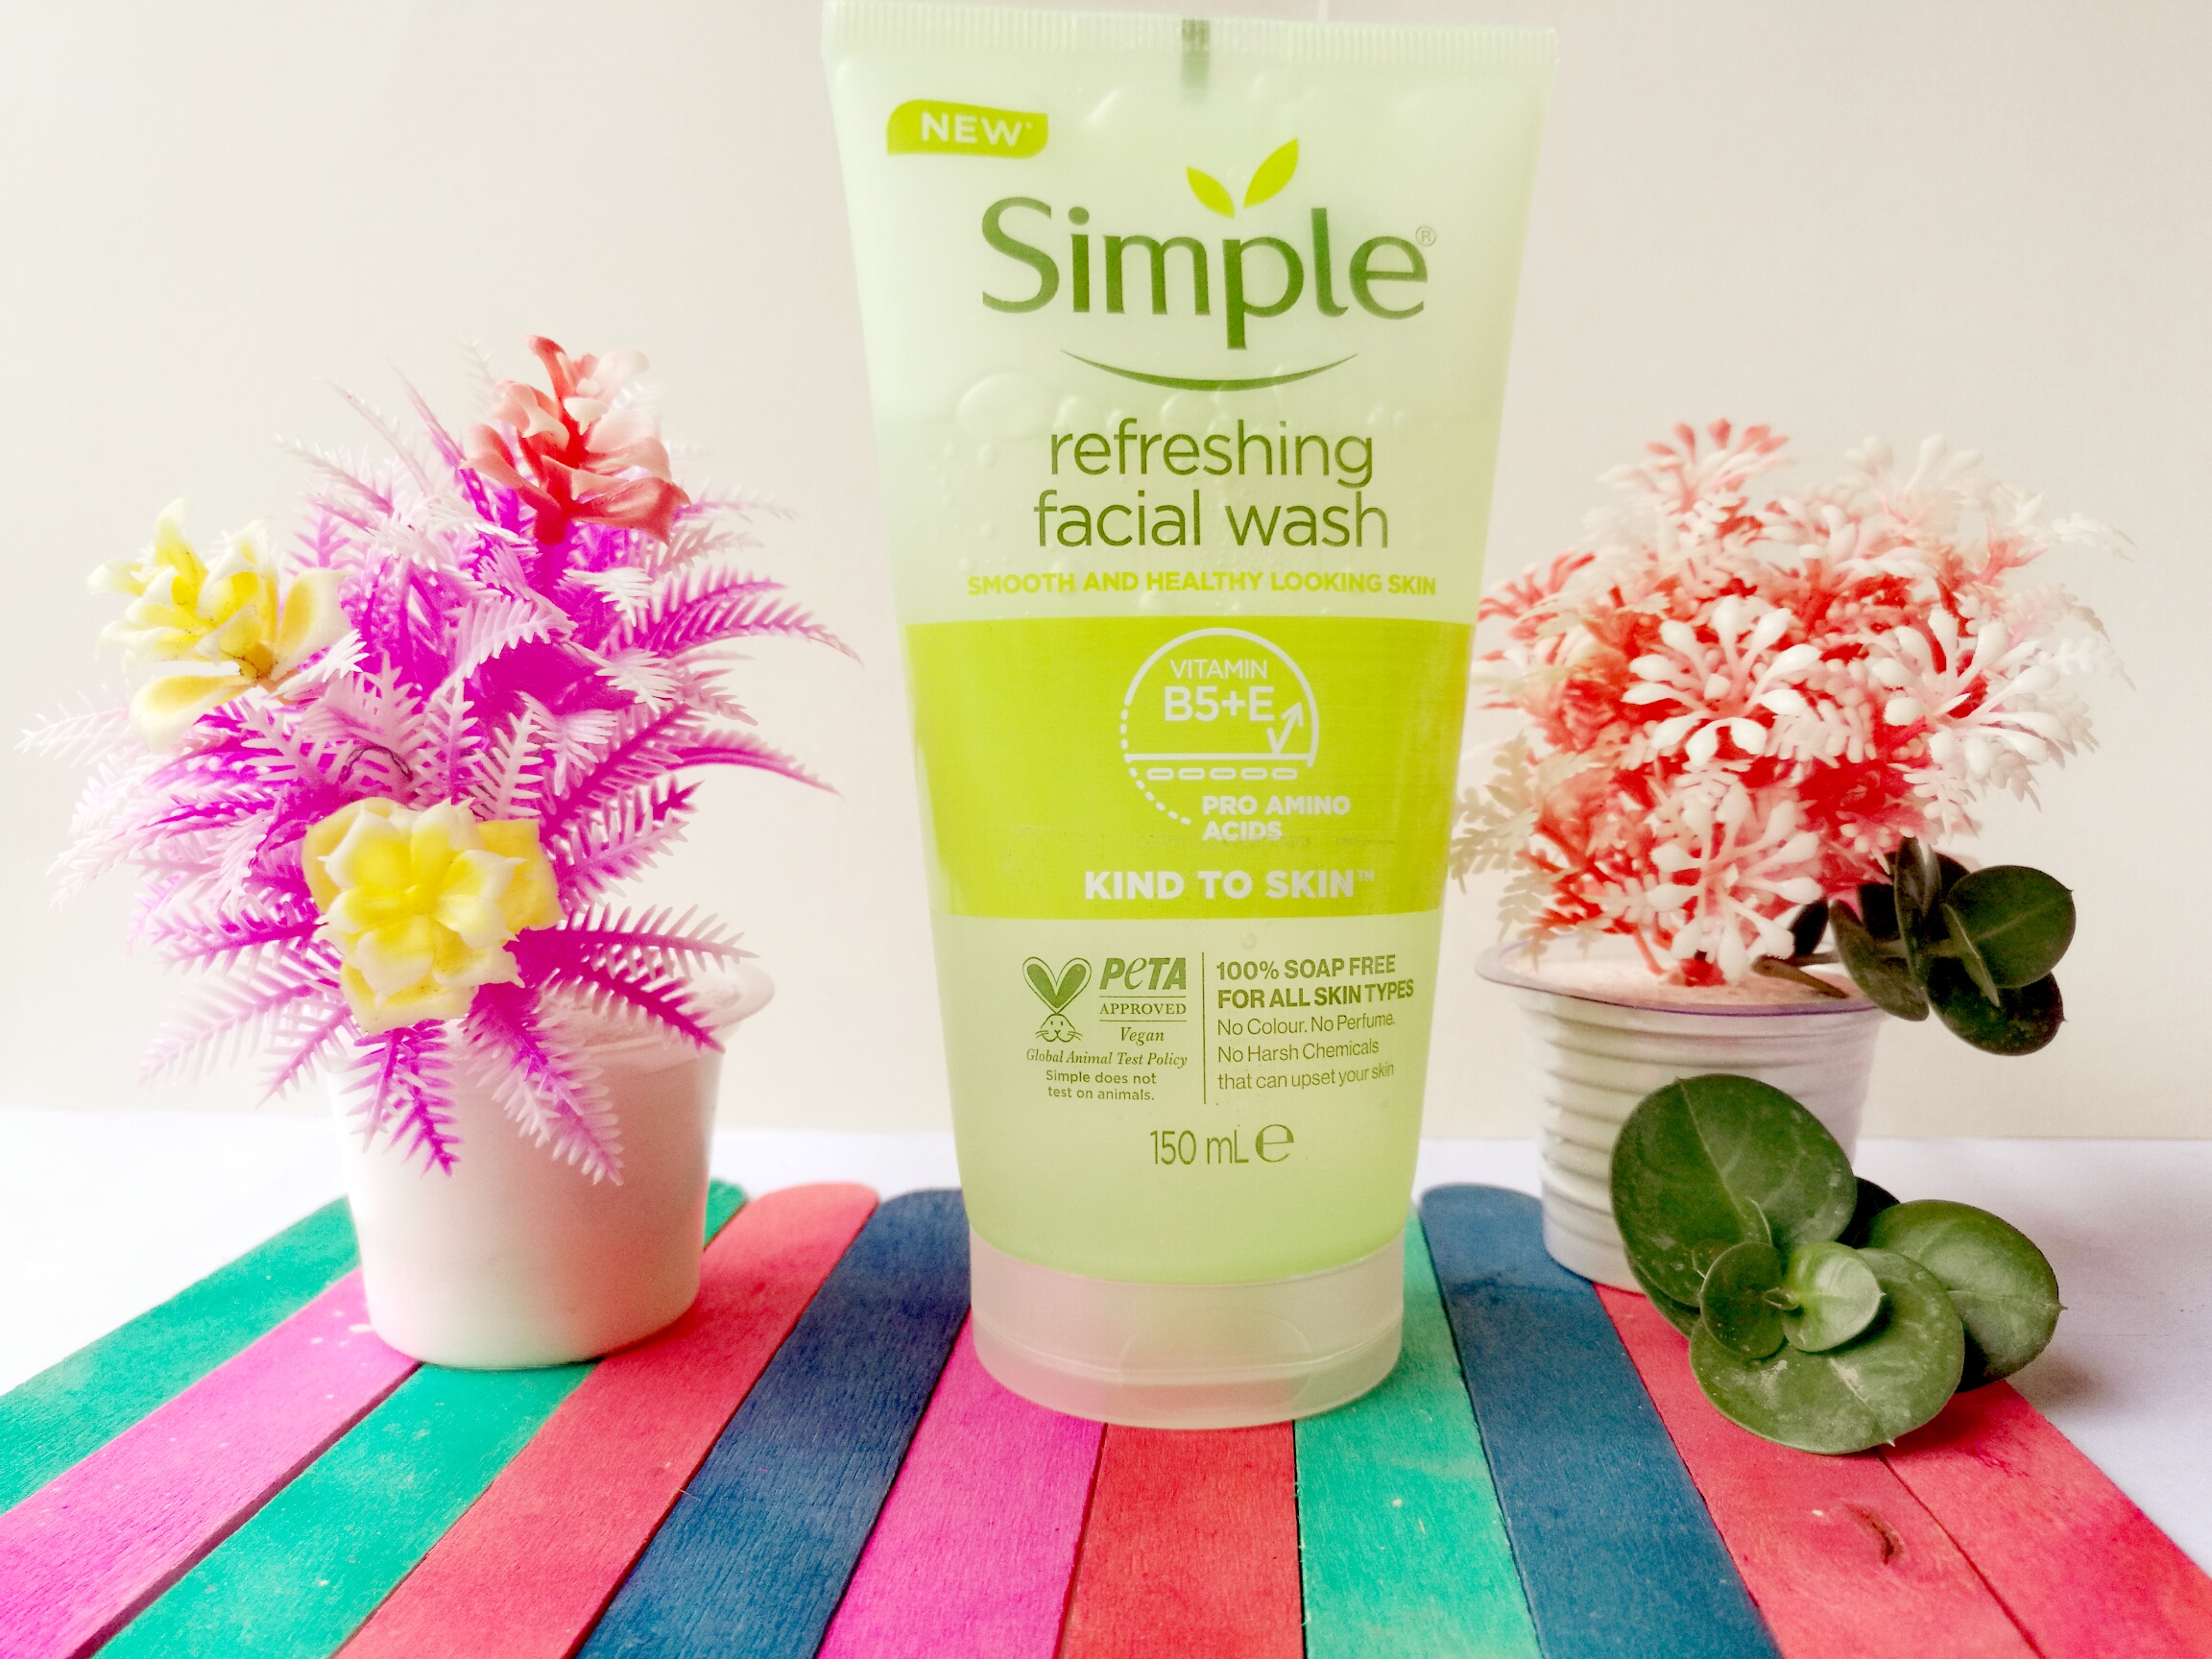 Honest Review: Is Simple Face Wash Perfect For Sensitive Skin?